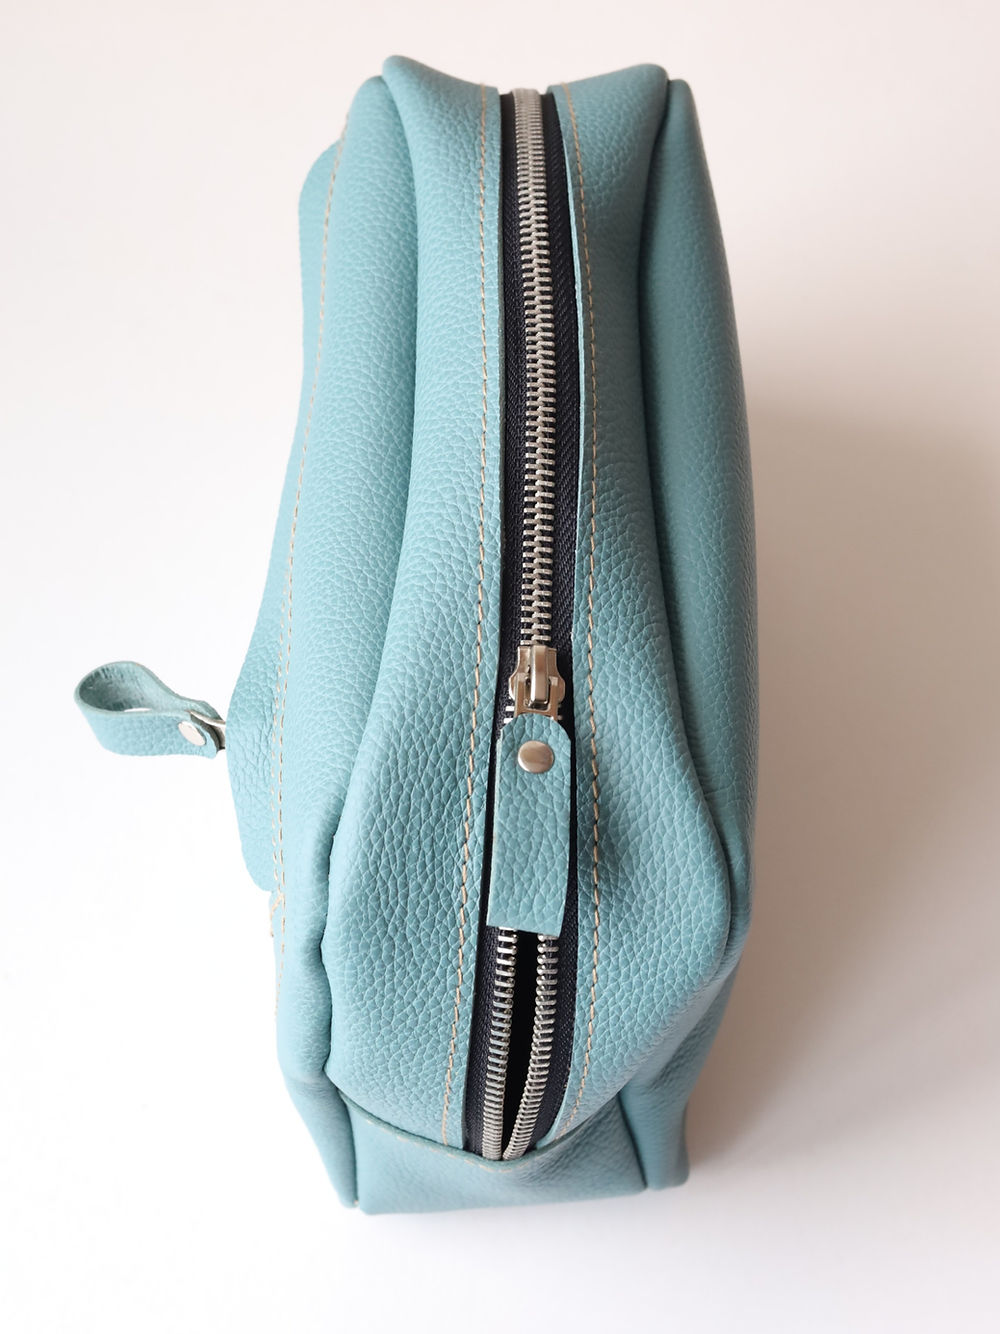 A DOUGLAS Toiletry Bag - Turquoise on a white surface.